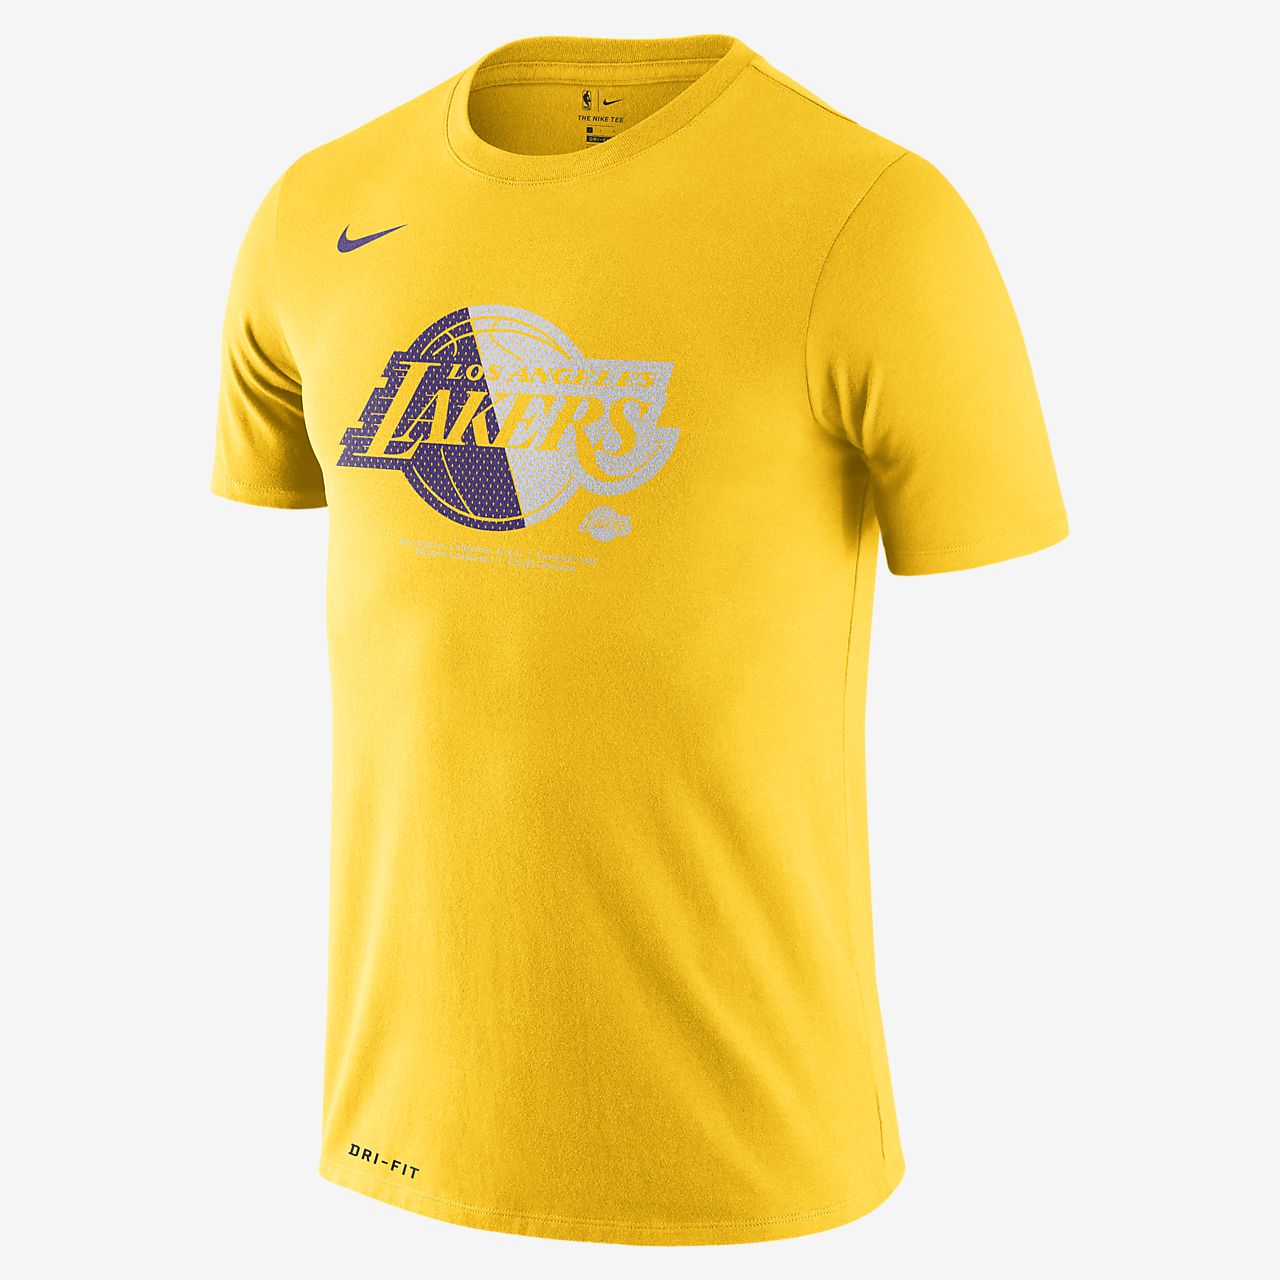 jd lakers jersey